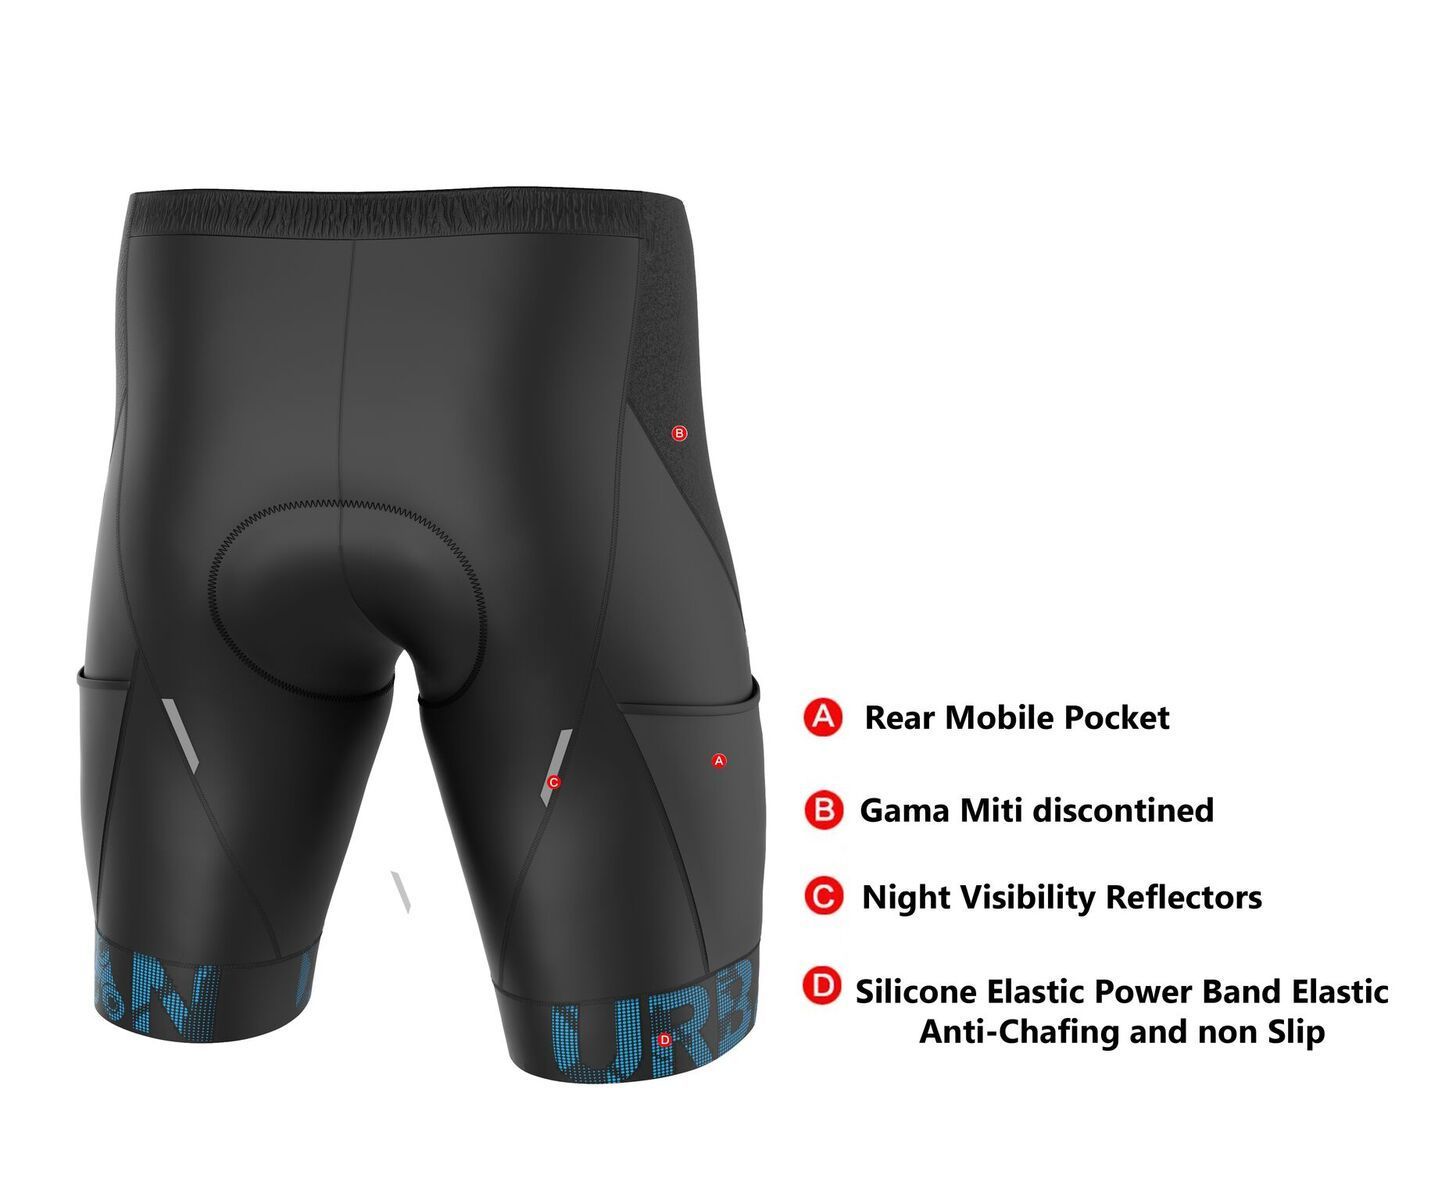 Men's Pro Padded Cycling Shorts with Hidden Cargo Pockets